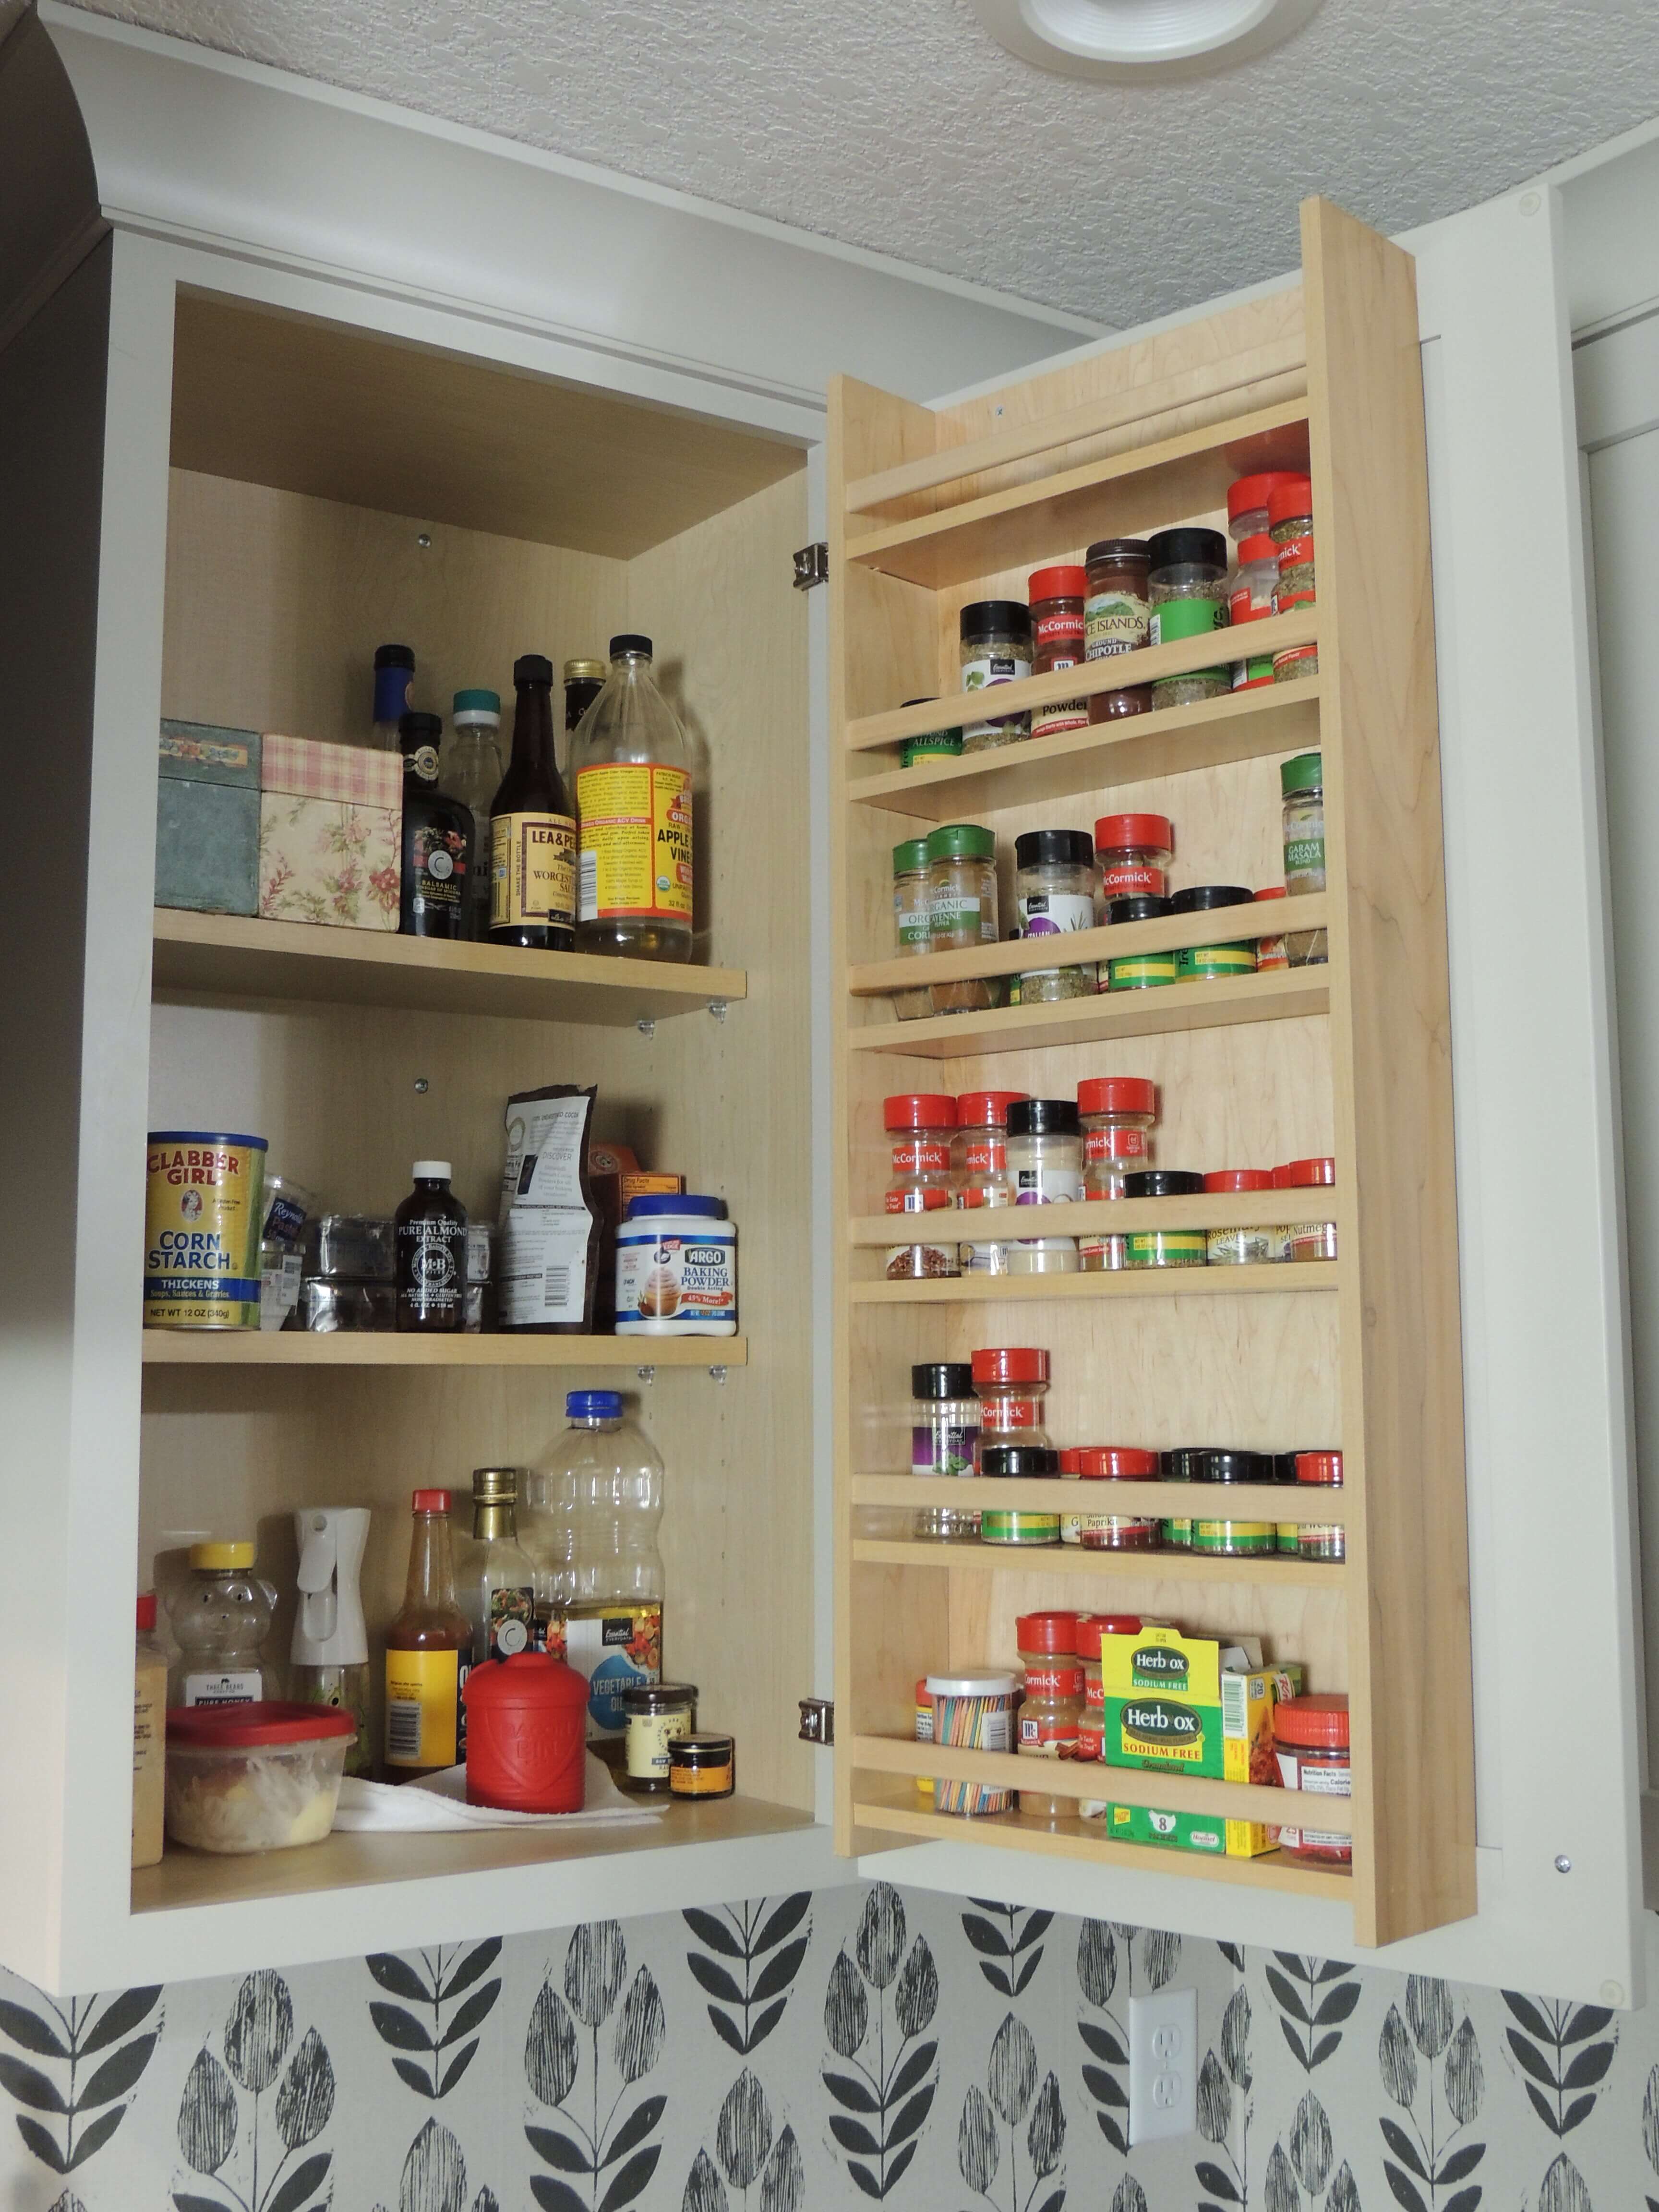 The cabinet door spice rack organizes an entire collection of spices and neatly displays them in a wall cabinet.